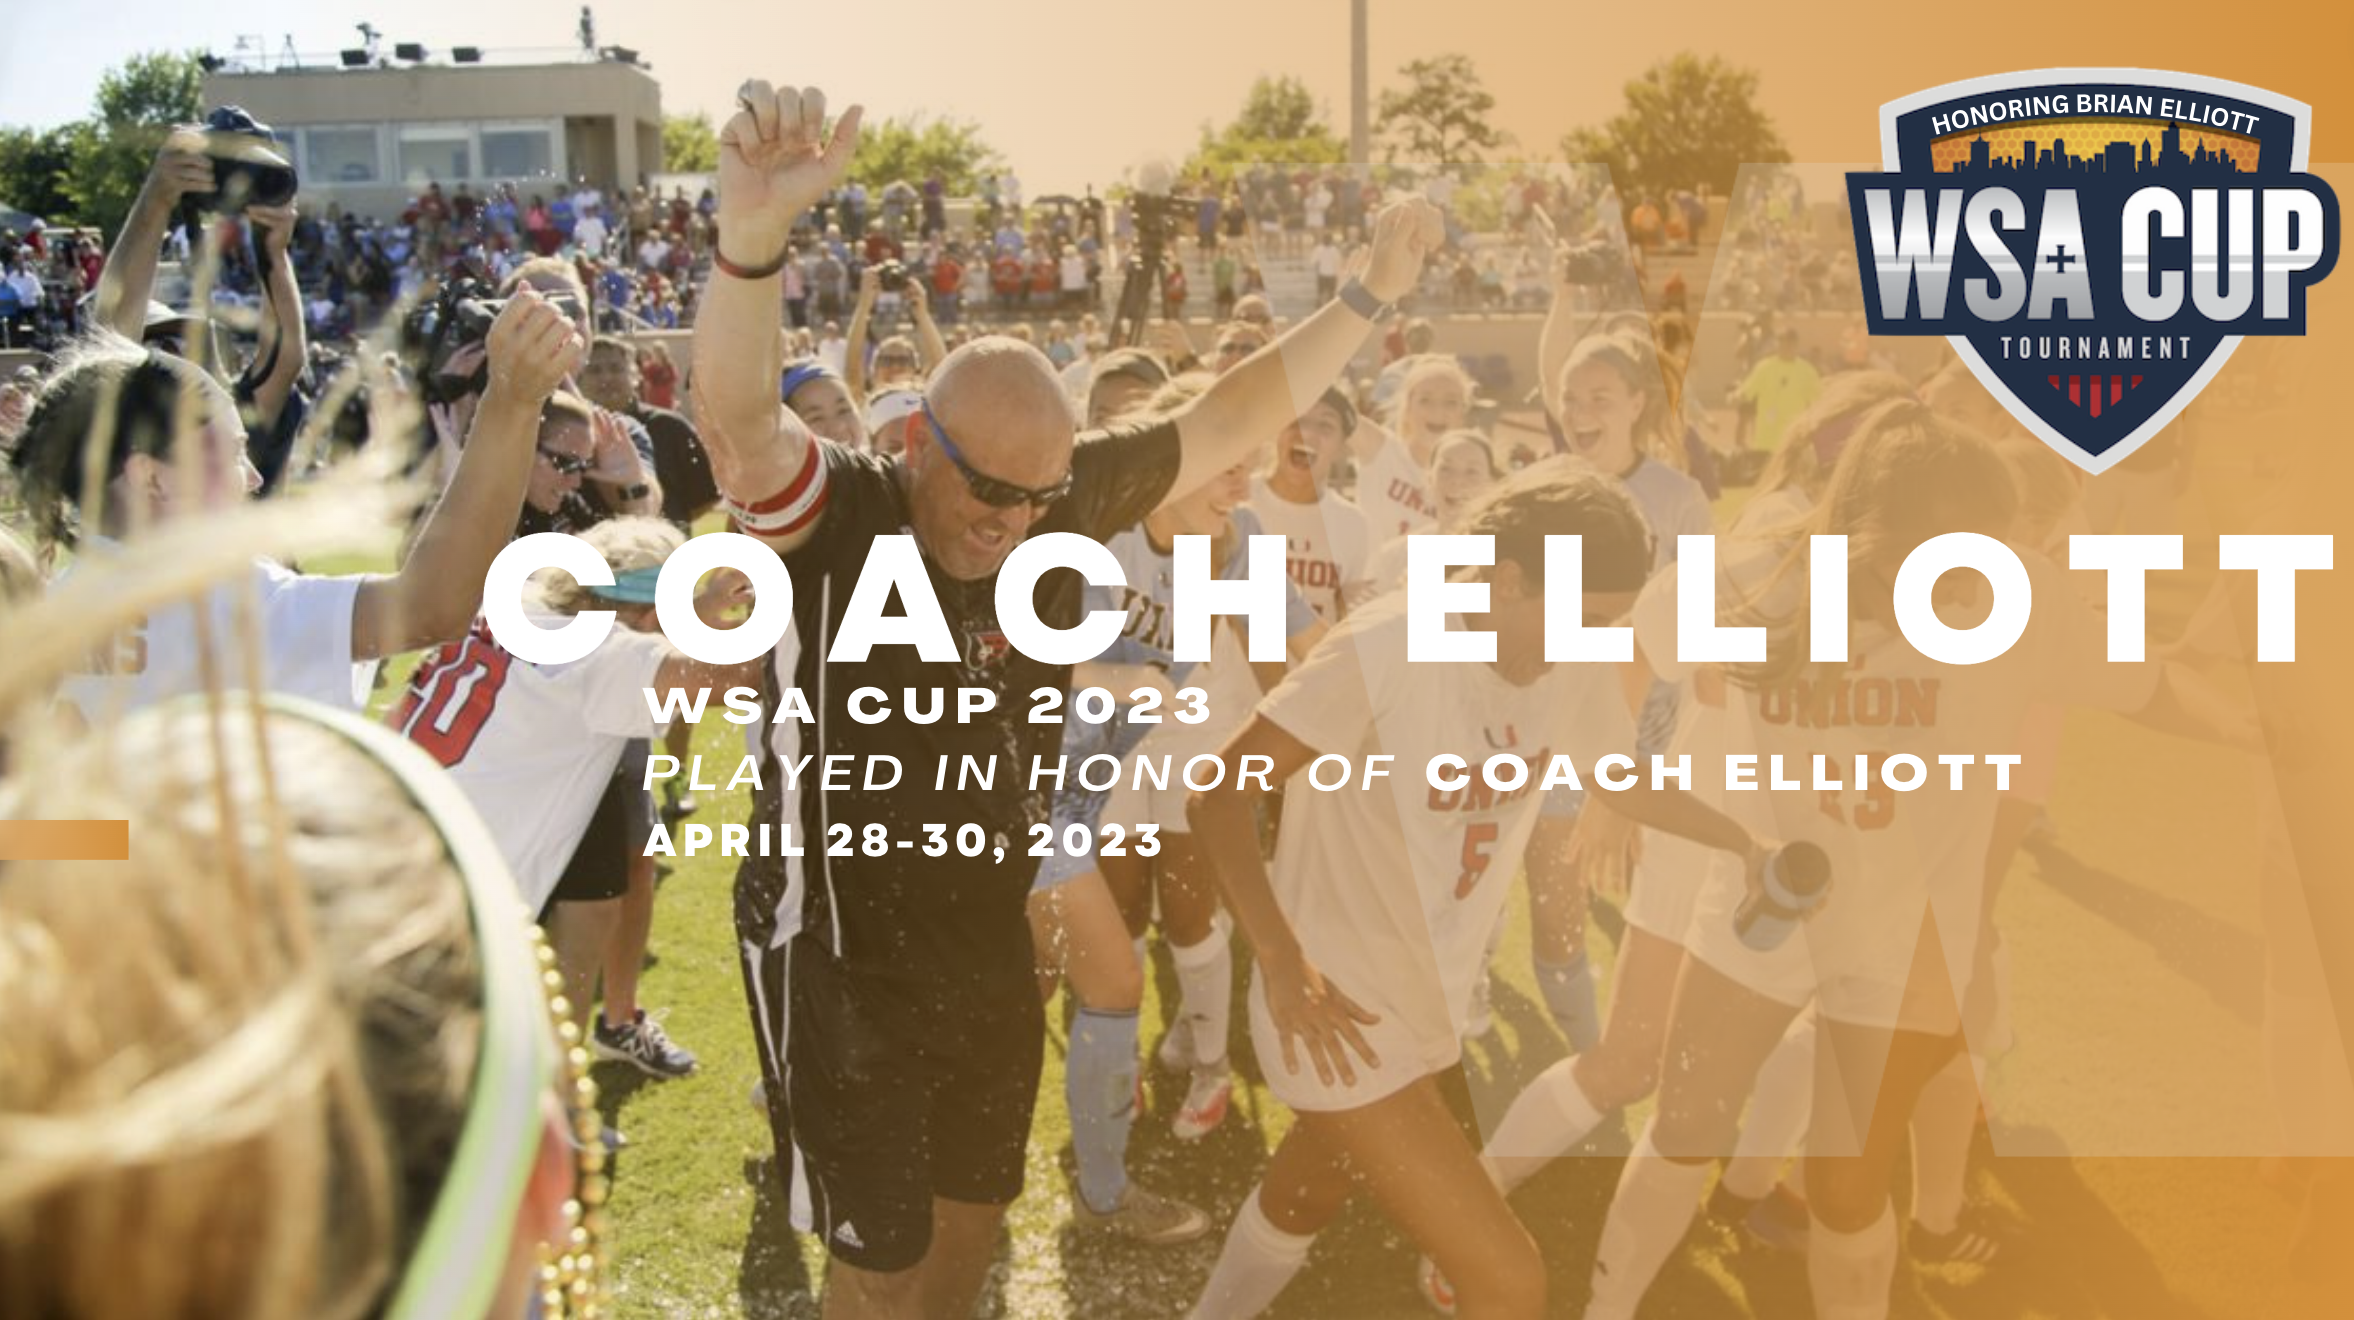 WSA CUP 2023 PLAYED IN HONOR OF COACH BRIAN ELLIOTT 